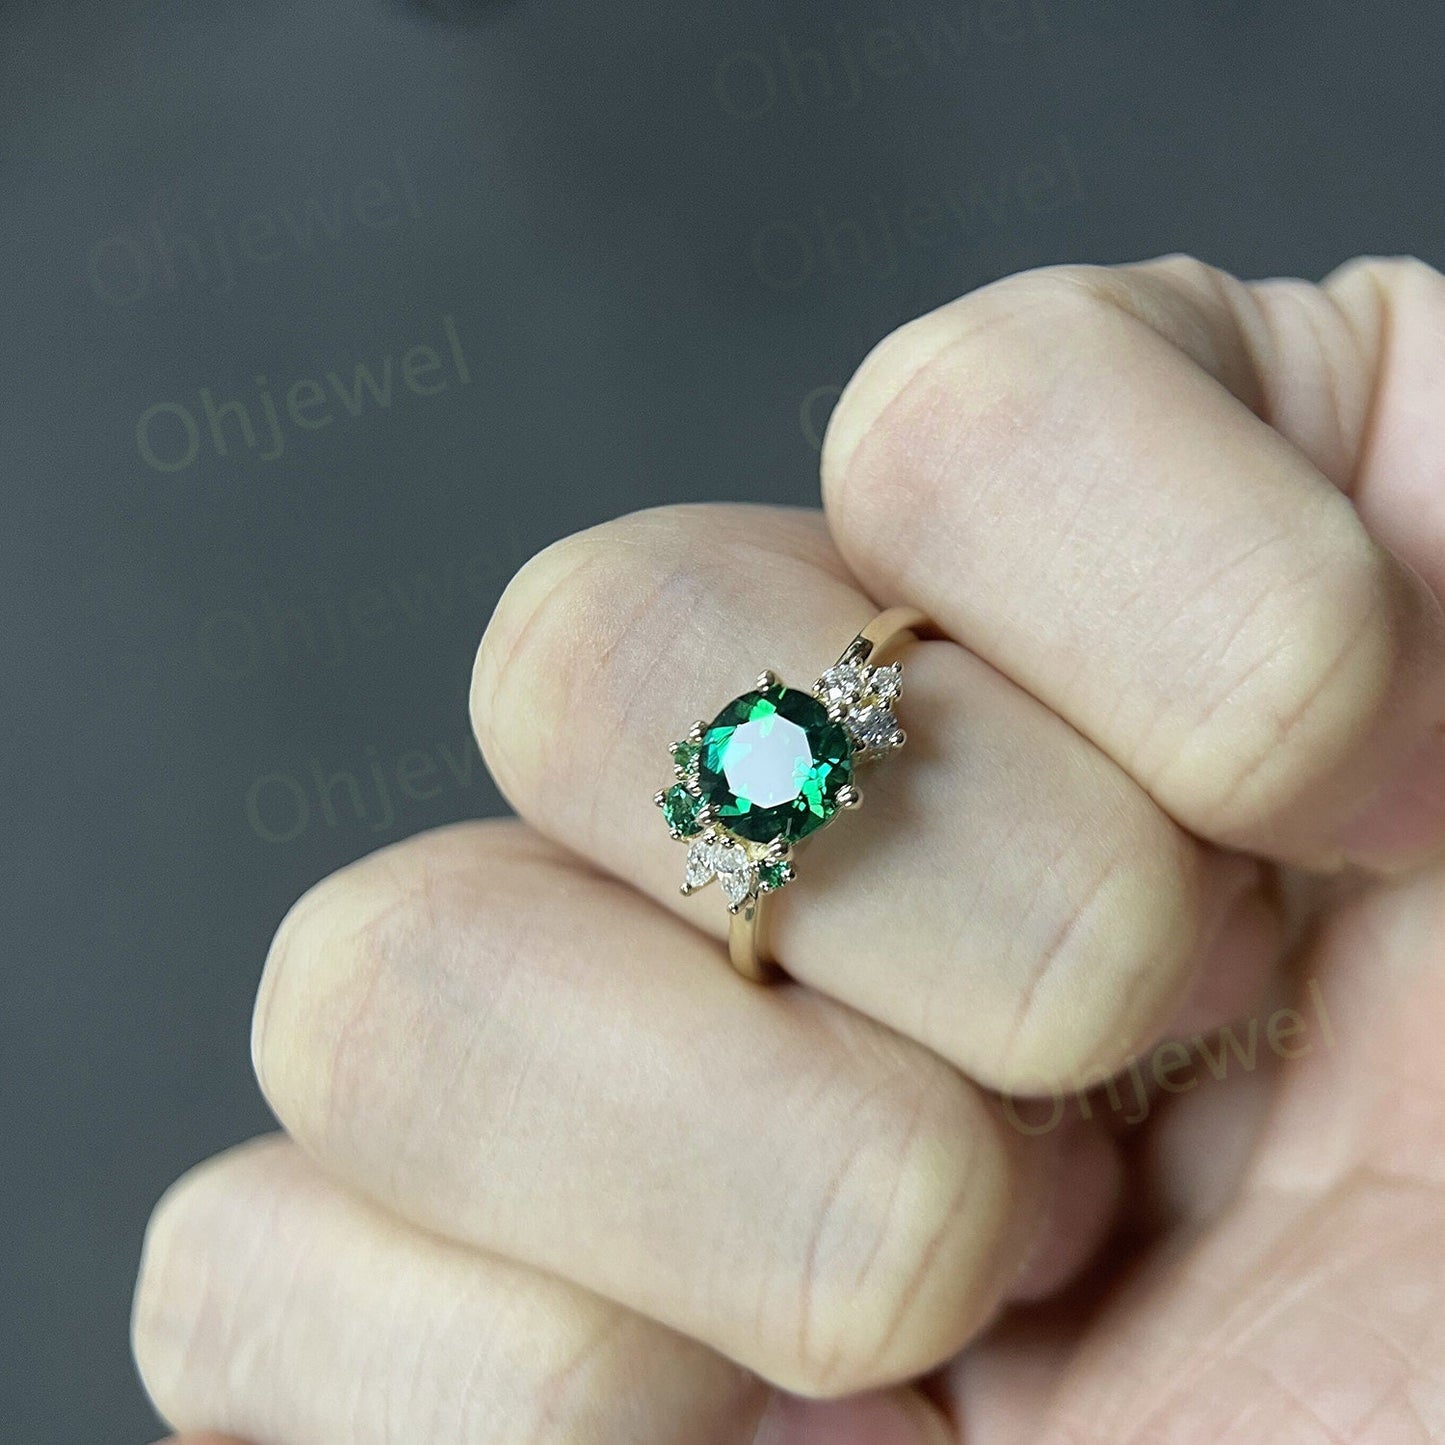 Hexagon cut emerald ring gold silver for women vintage unique emerald engagement ring cluster art deco moissanite bridal ring gifts